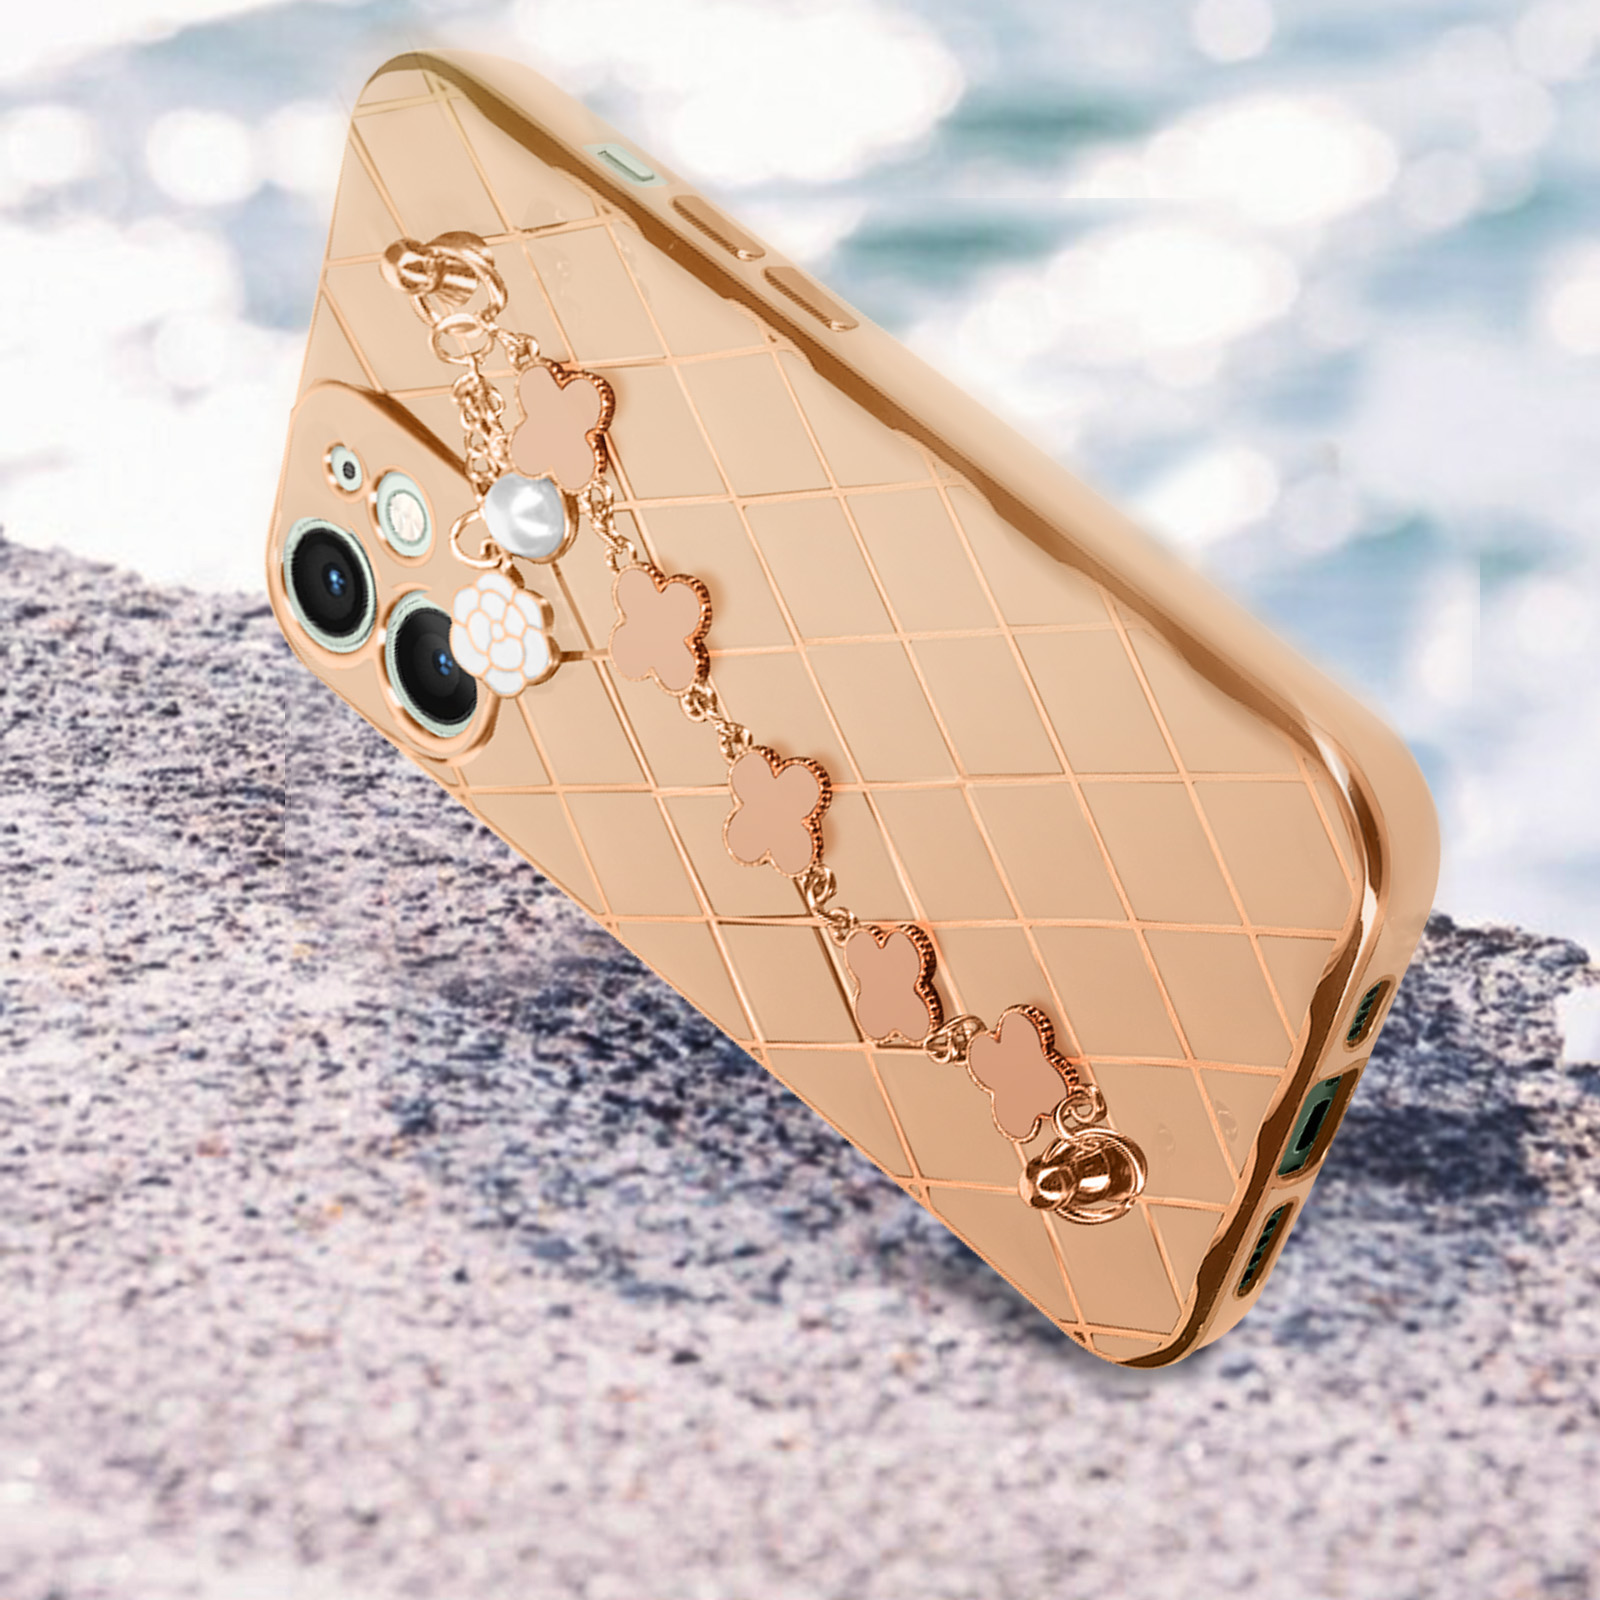 Series, Rosegold AVIZAR 12, Trend iPhone Apple, Backcover,